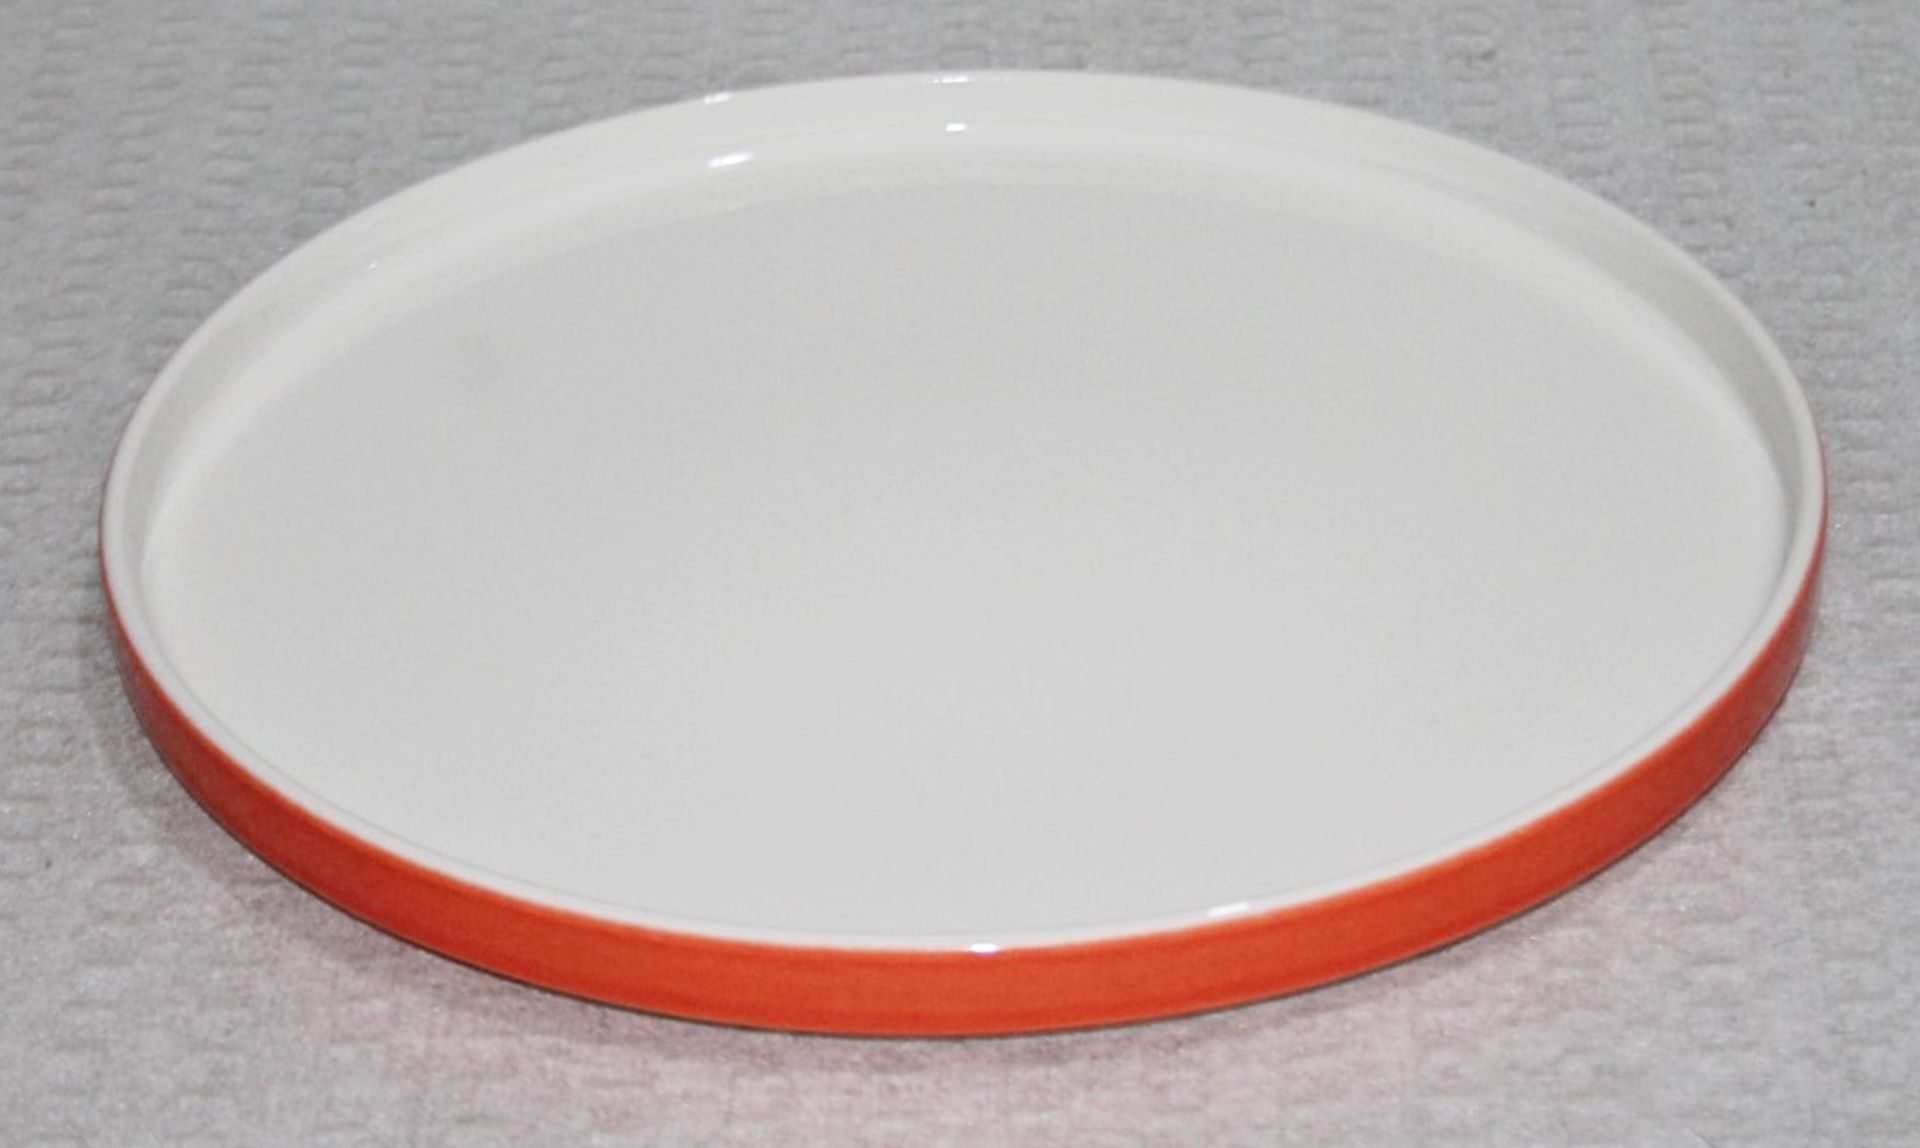 1 x VILLEROY & BOCH Porcelain ø24cm Universial Plate With An Orange Band - Unboxed Stock - Ref: - Image 5 of 5